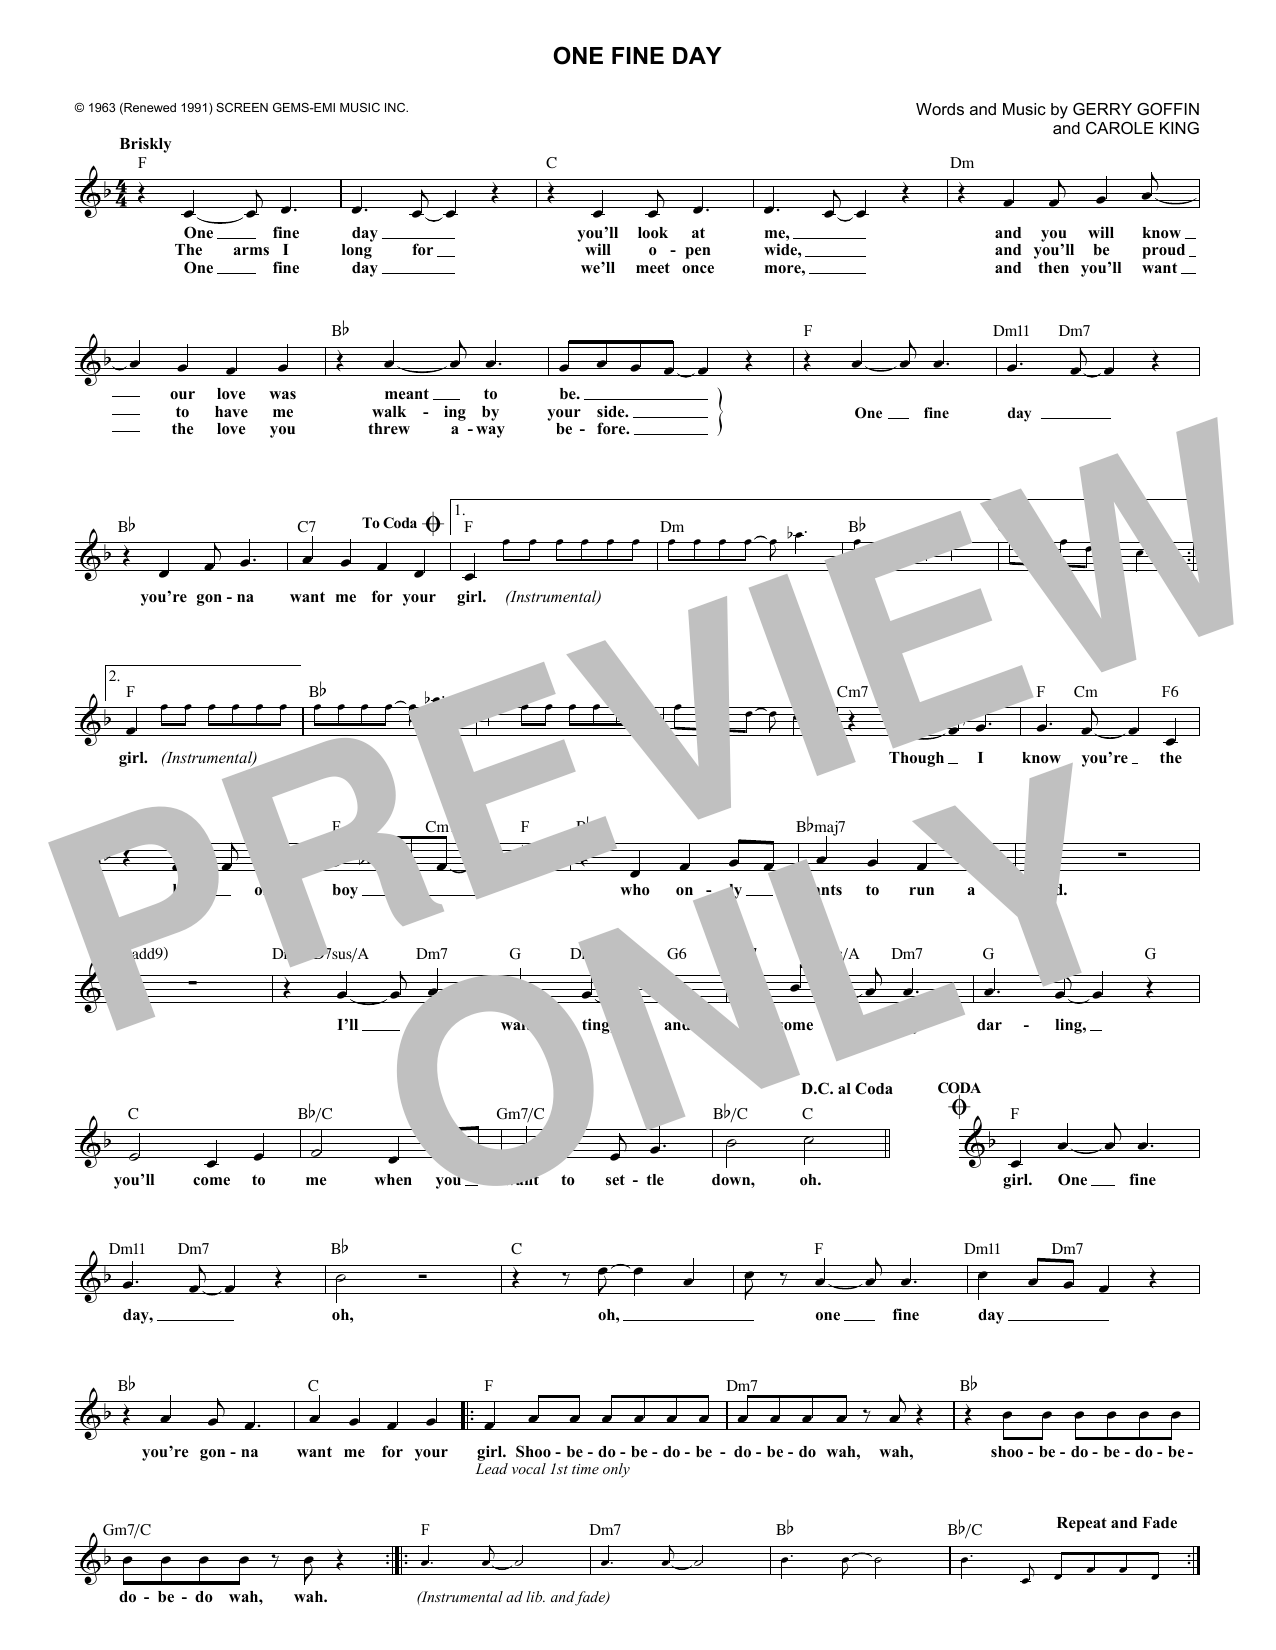 Download The Chiffons One Fine Day Sheet Music